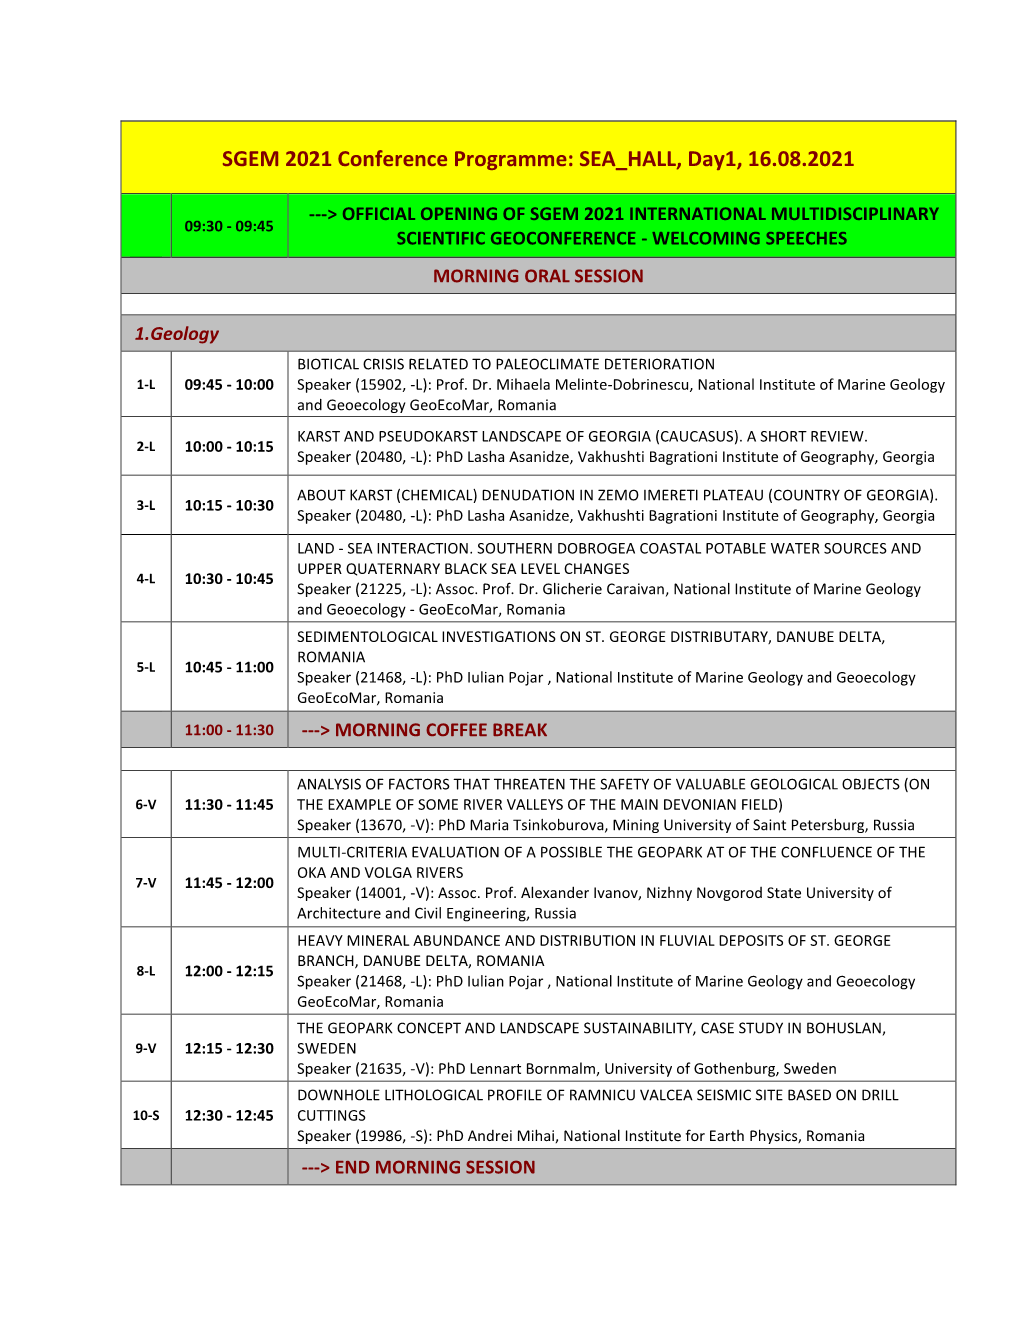 SGEM 2021 Conference Programme: SEA HALL, Day1, 16.08.2021